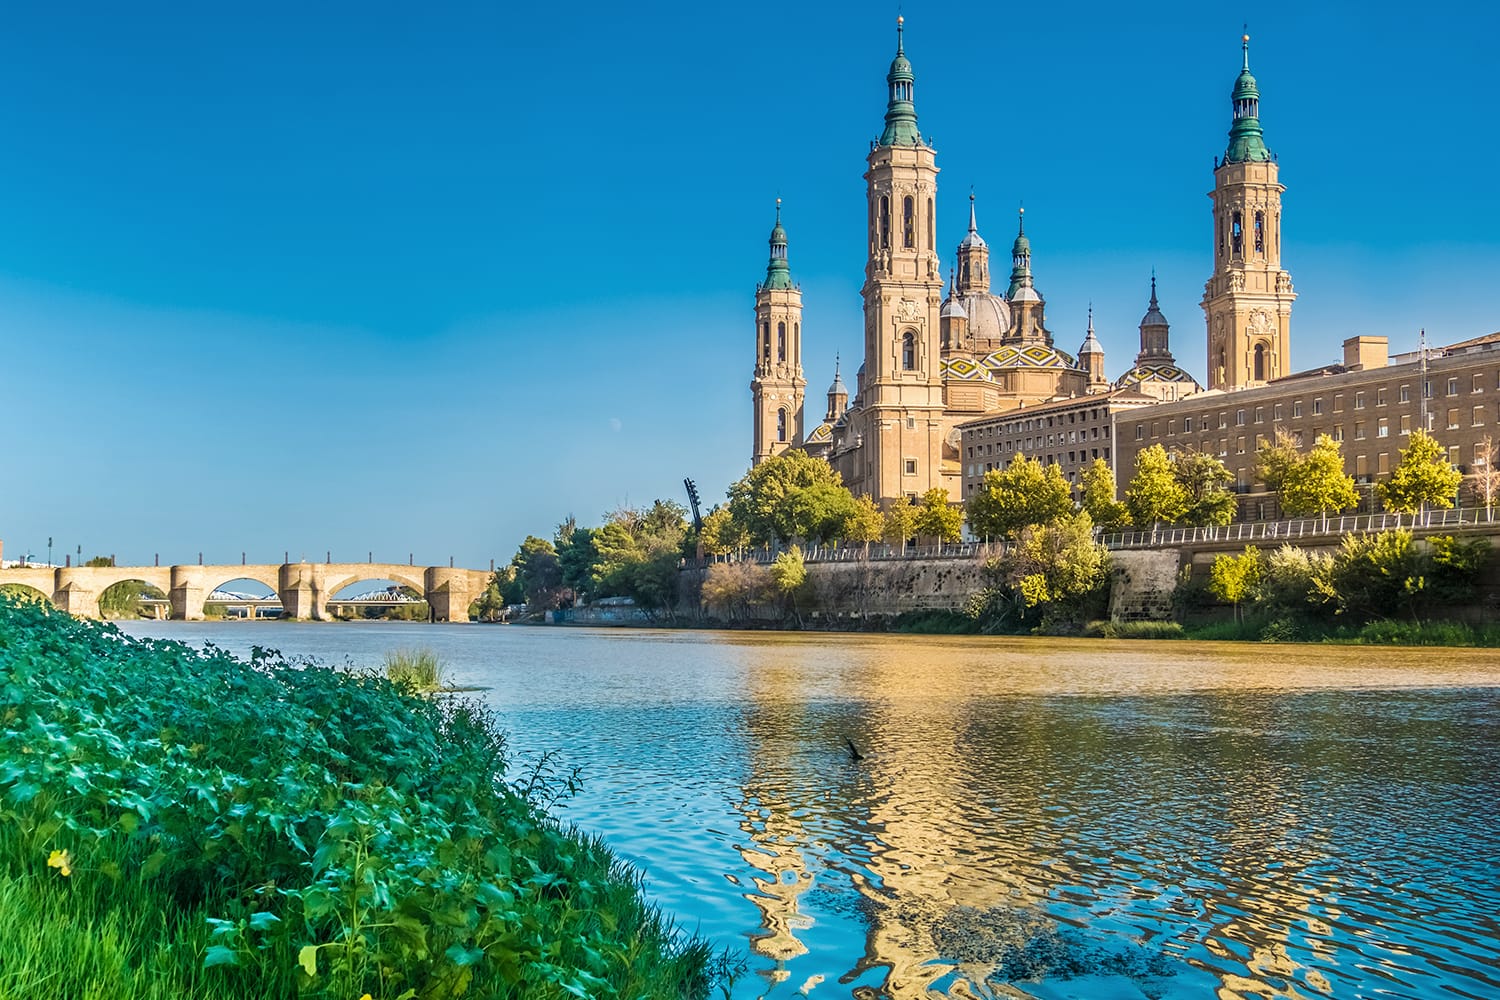 The Cathedral-Basilica of Our Lady of the Pillar, Zaragoza (Saragossa) the capital city of of Aragon, Spain.